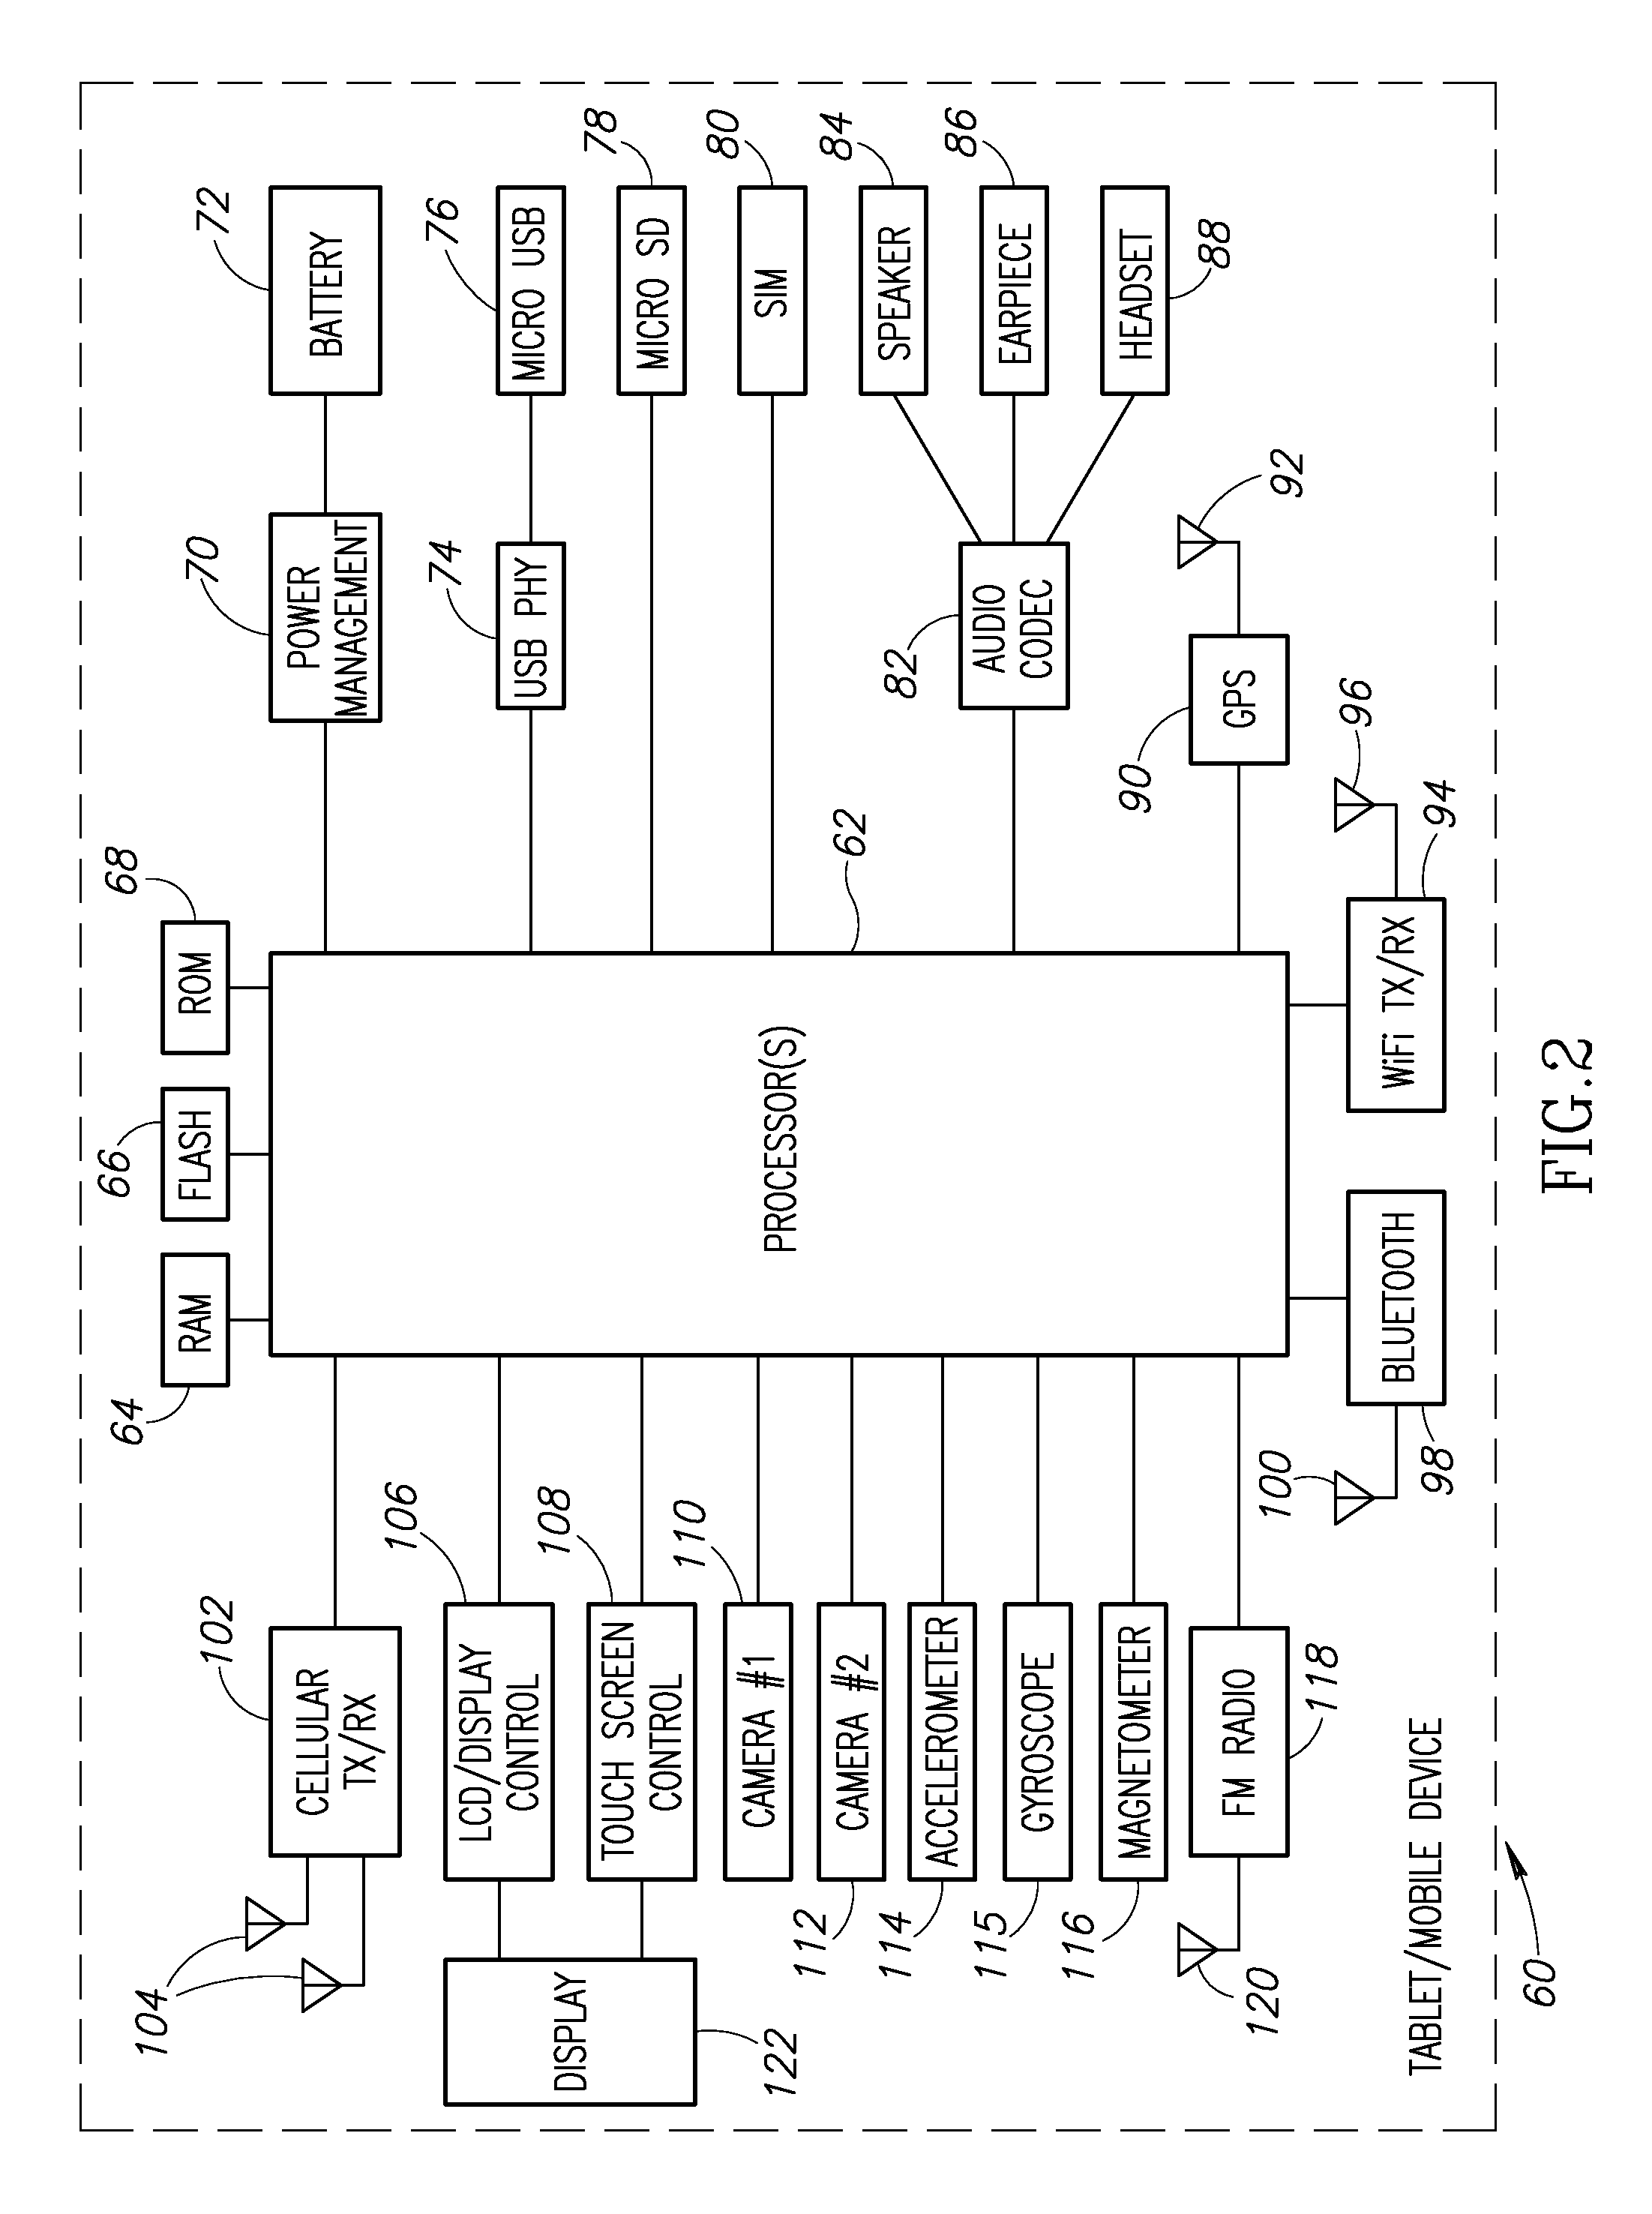 System and method of measuring distances related to an object